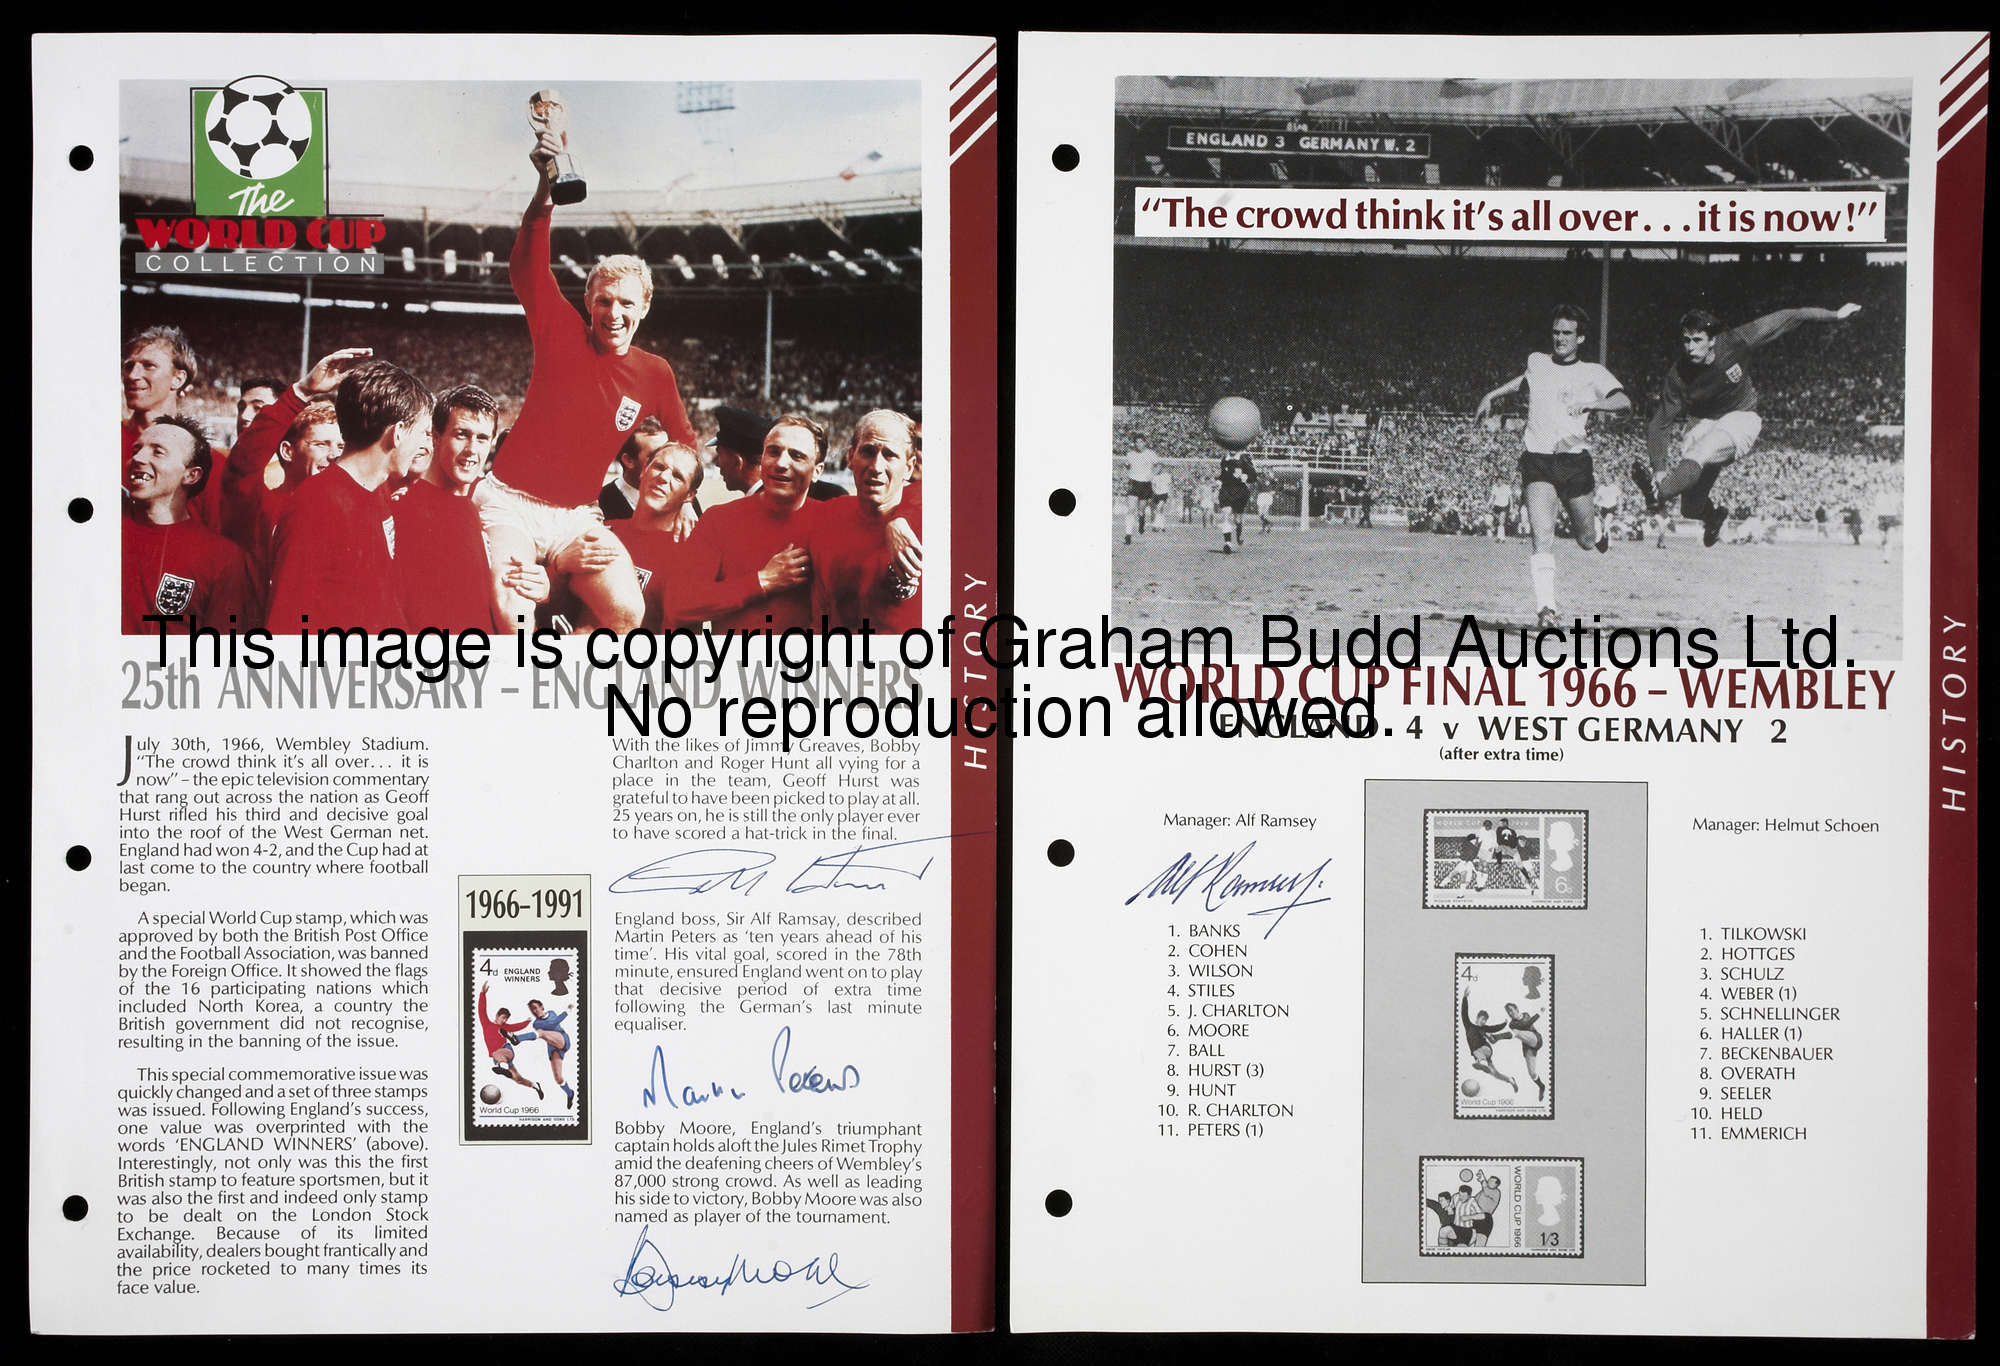 The autographs of Alf Ramsey, Bobby Moore, Geoff Hurst and Martin Peters, with the England 1966 Worl...